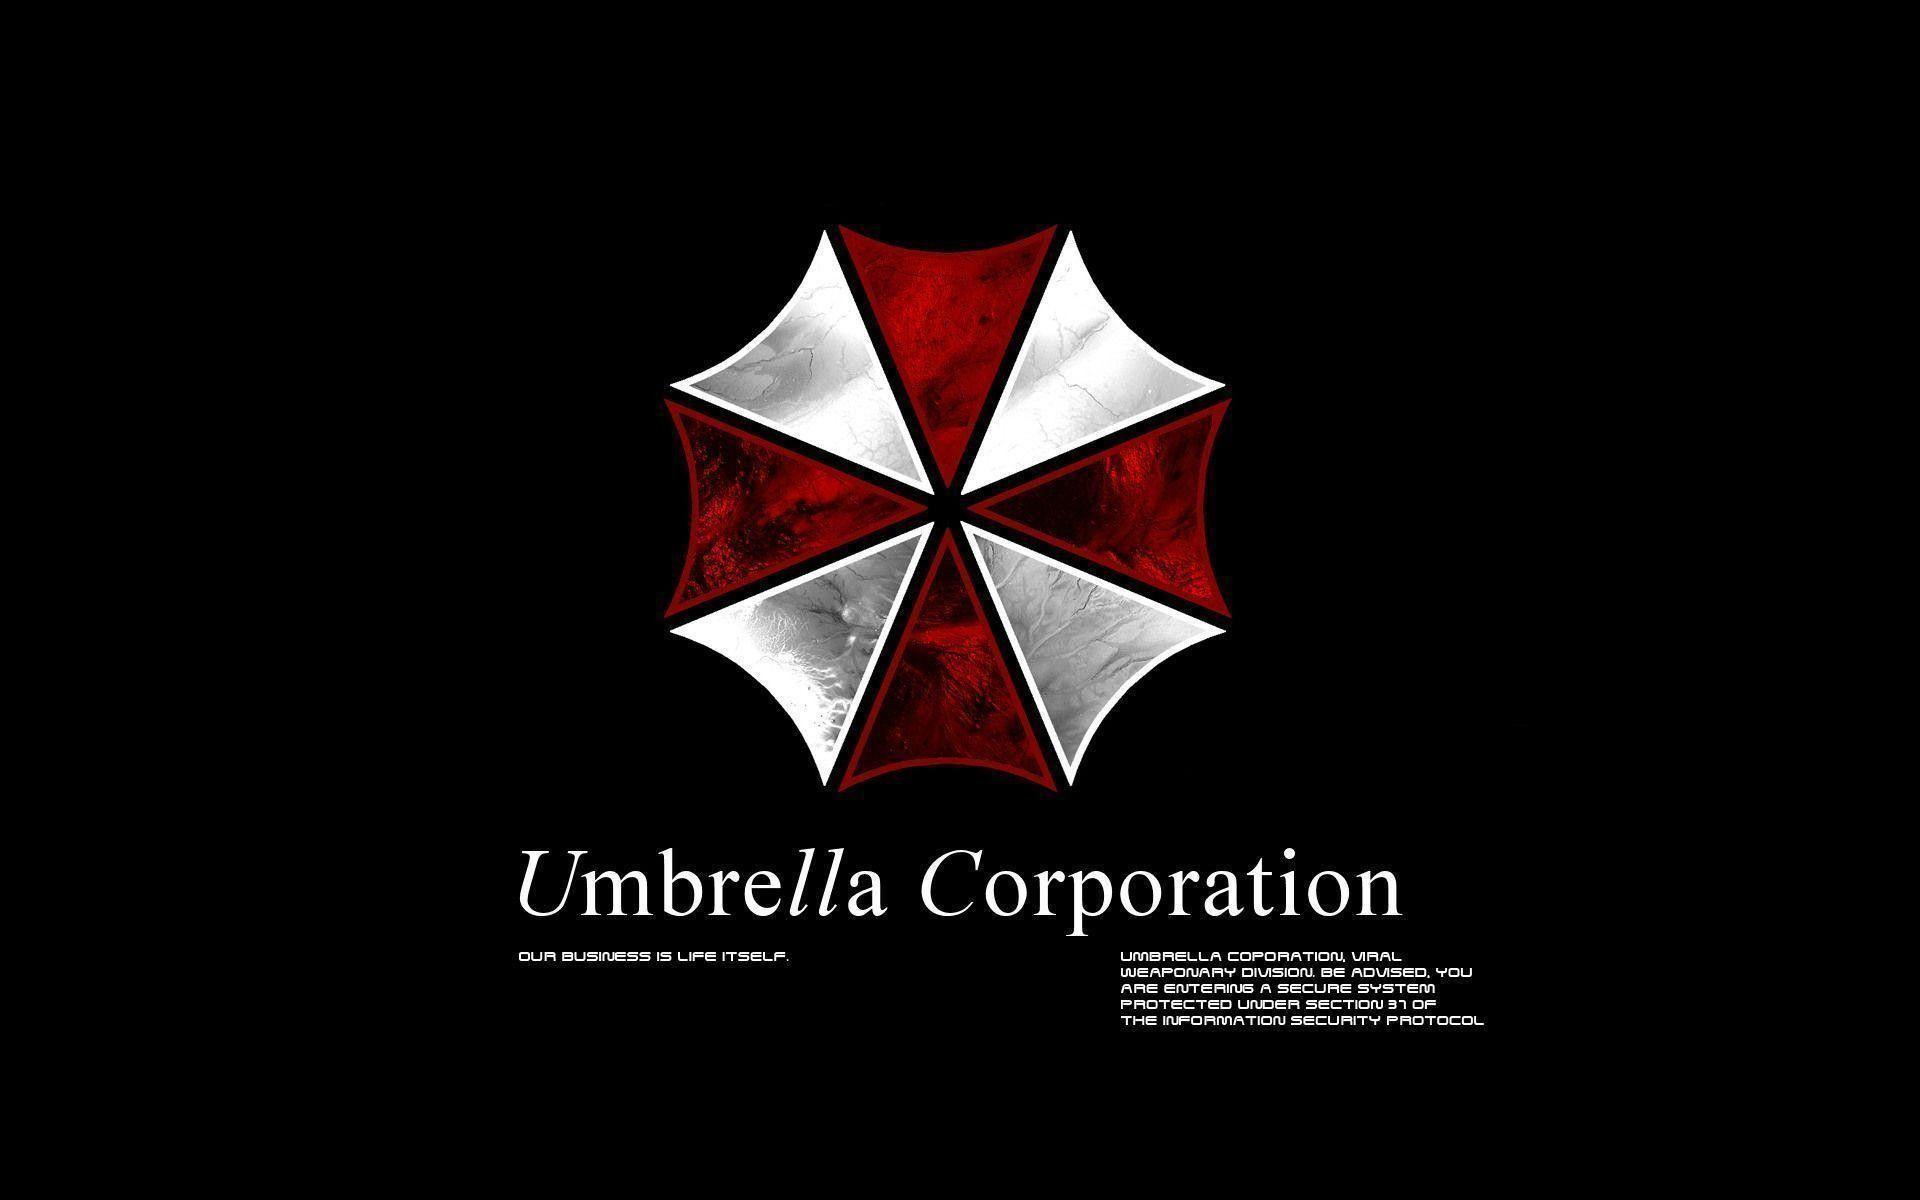 Umbrella Corporation Wallpapers and Backgrounds 4K, HD, Dual Screen